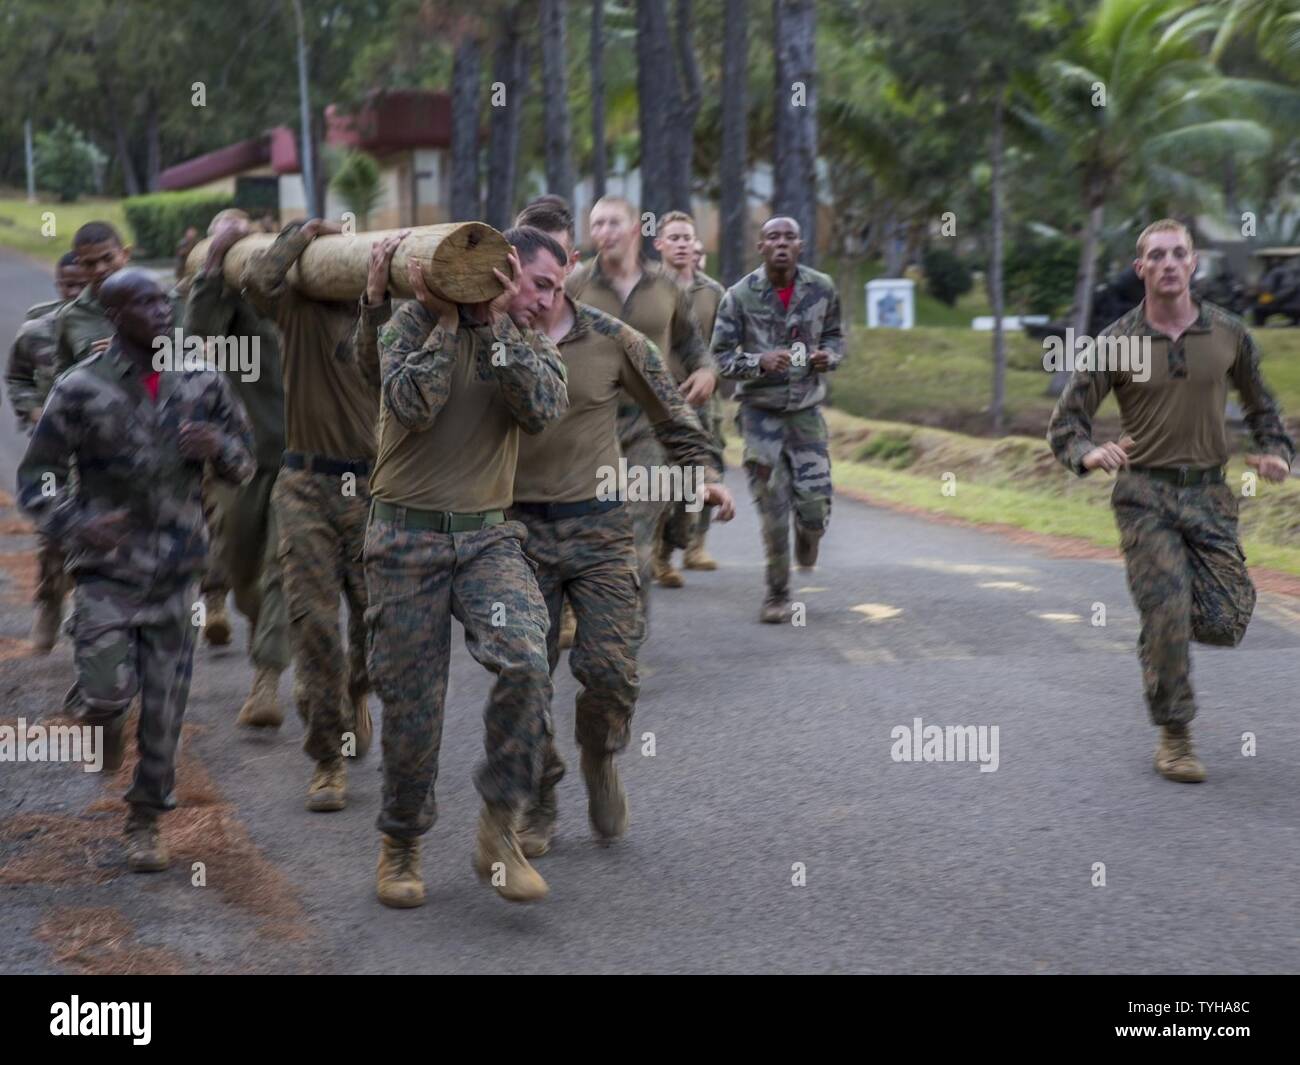 U.S. Marines with Combat Engineer Platoon, Task Force Koa Moana 16-4, integrated with the French army and the Republic of Fiji Military Forces to compete in the French army log challenge during Croix Du Sud in Plum, New Caledonia, Nov. 9, 2016. Croix Du Sud is a multi-national, humanitarian assistance disaster relief and non-combatant evacuation operation exercise conducted every two years to prepare nations in the event of a cyclone in the South Pacific. The Koa Moana exercise seeks to enhance senior military leader engagements between allied and partner nations in the Pacific with a collecti Stock Photo